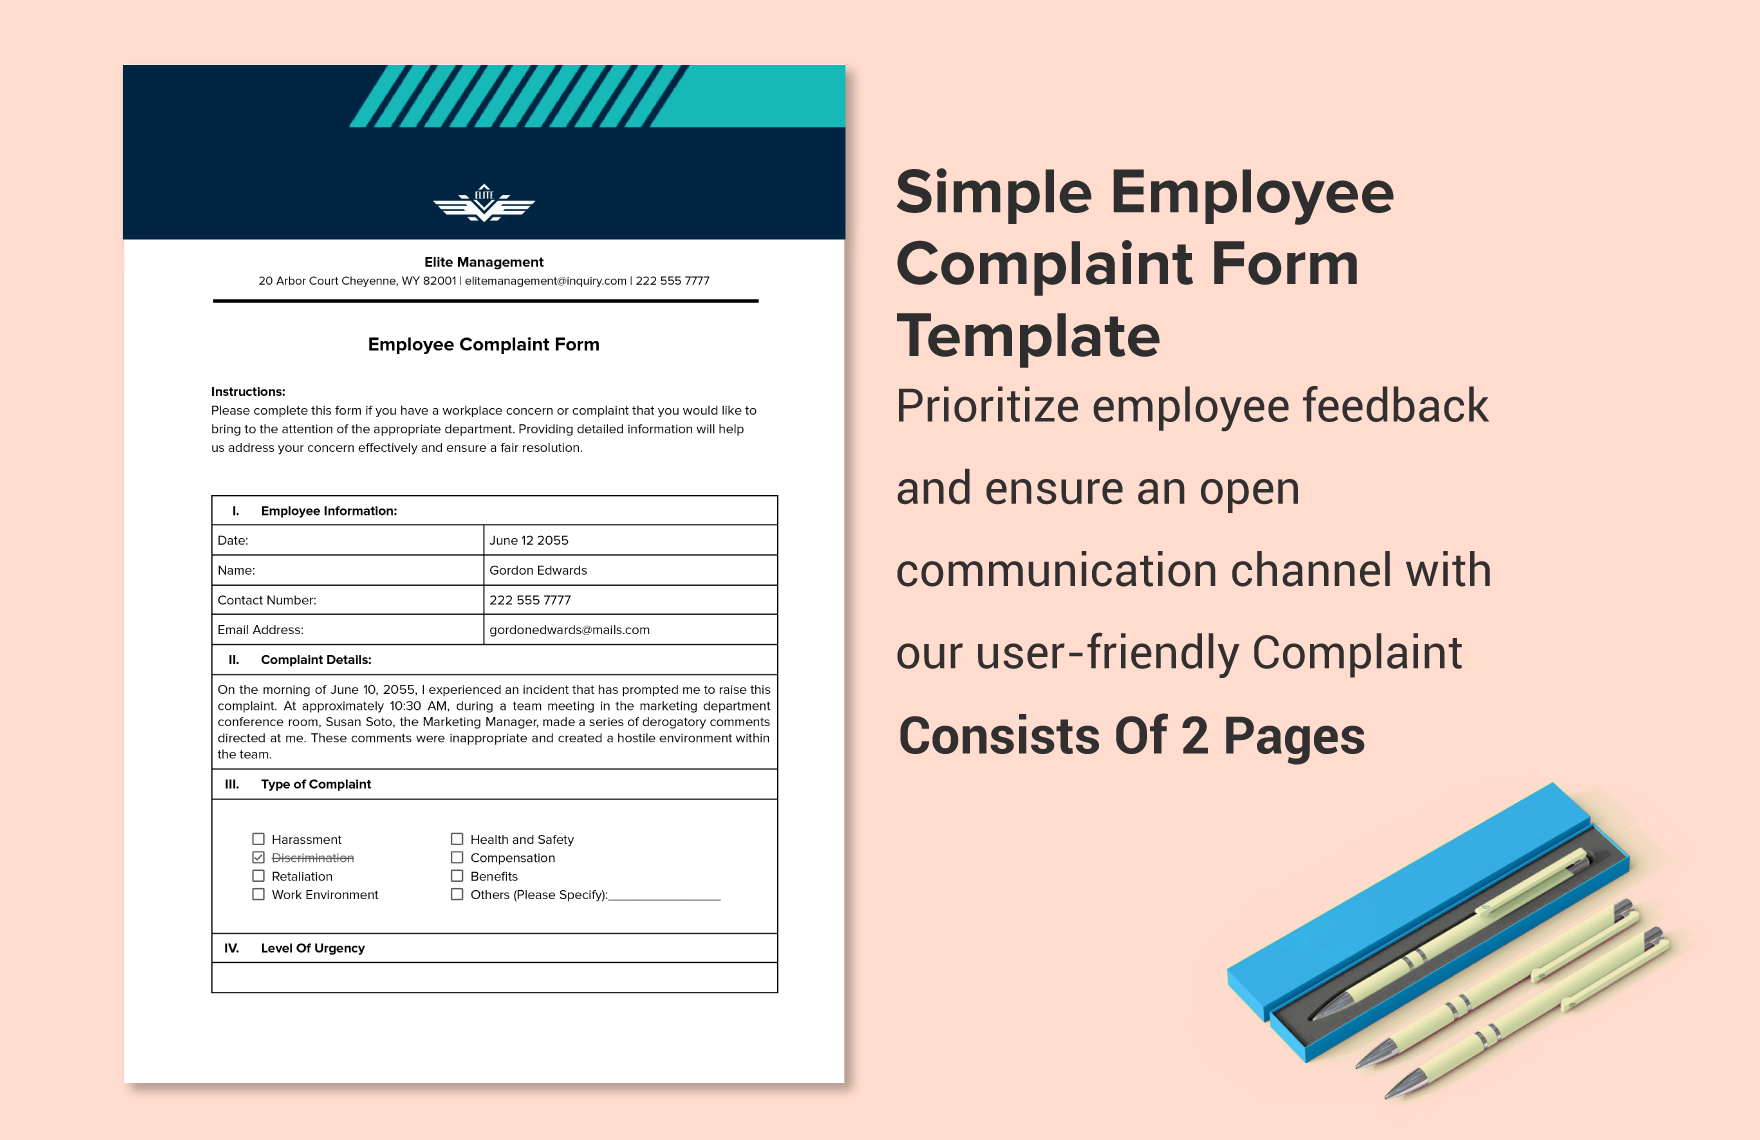 Simple Employee Complaint Form Template